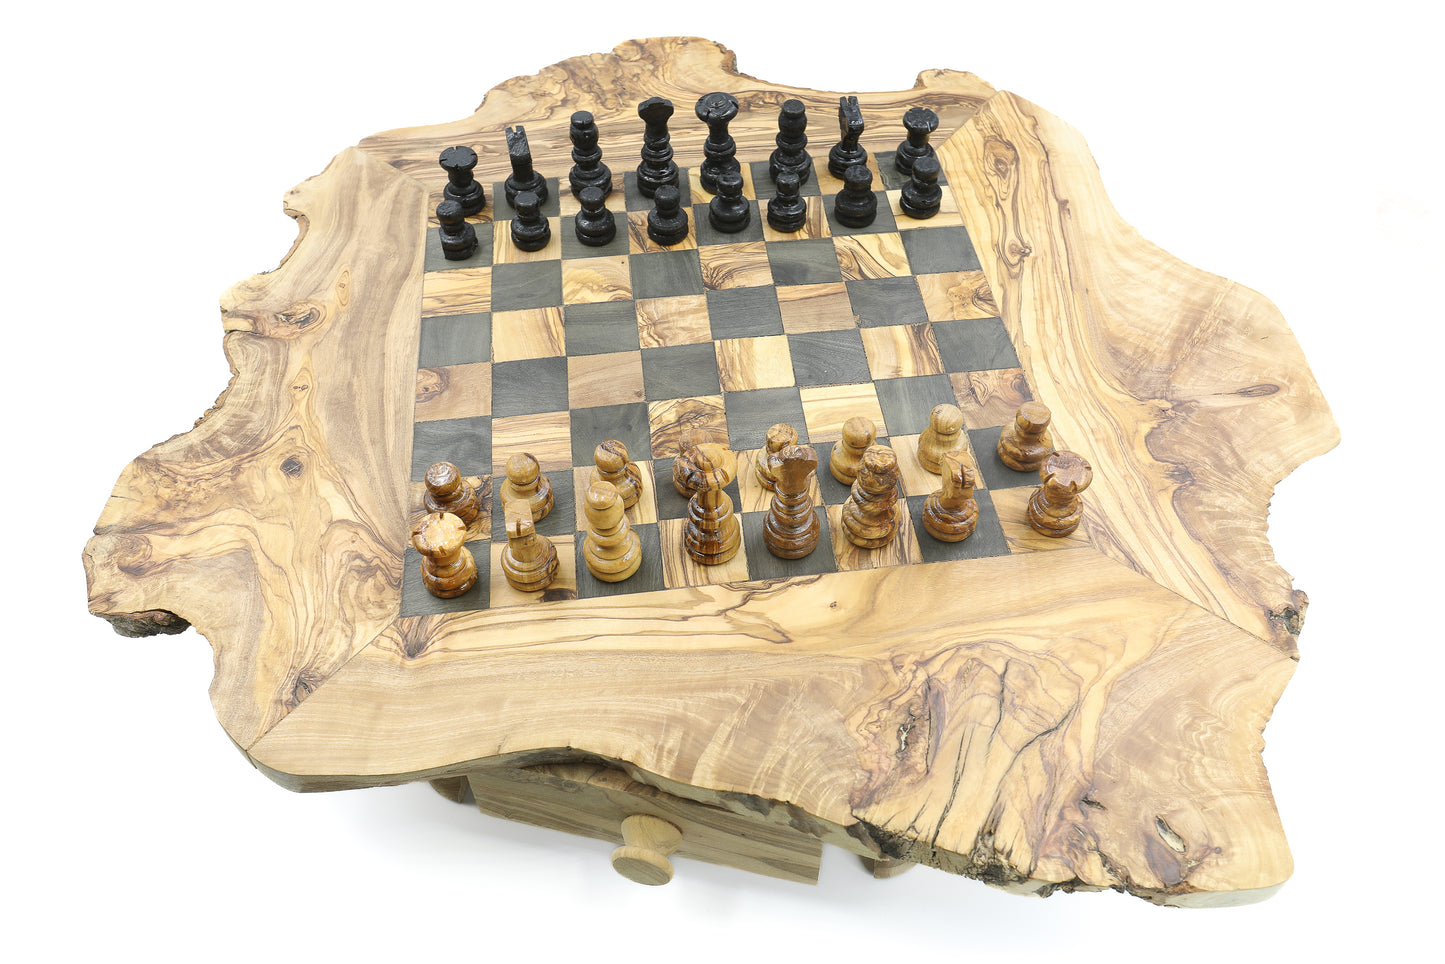 Handcrafted chess set made from natural olive wood, featuring both board and pieces